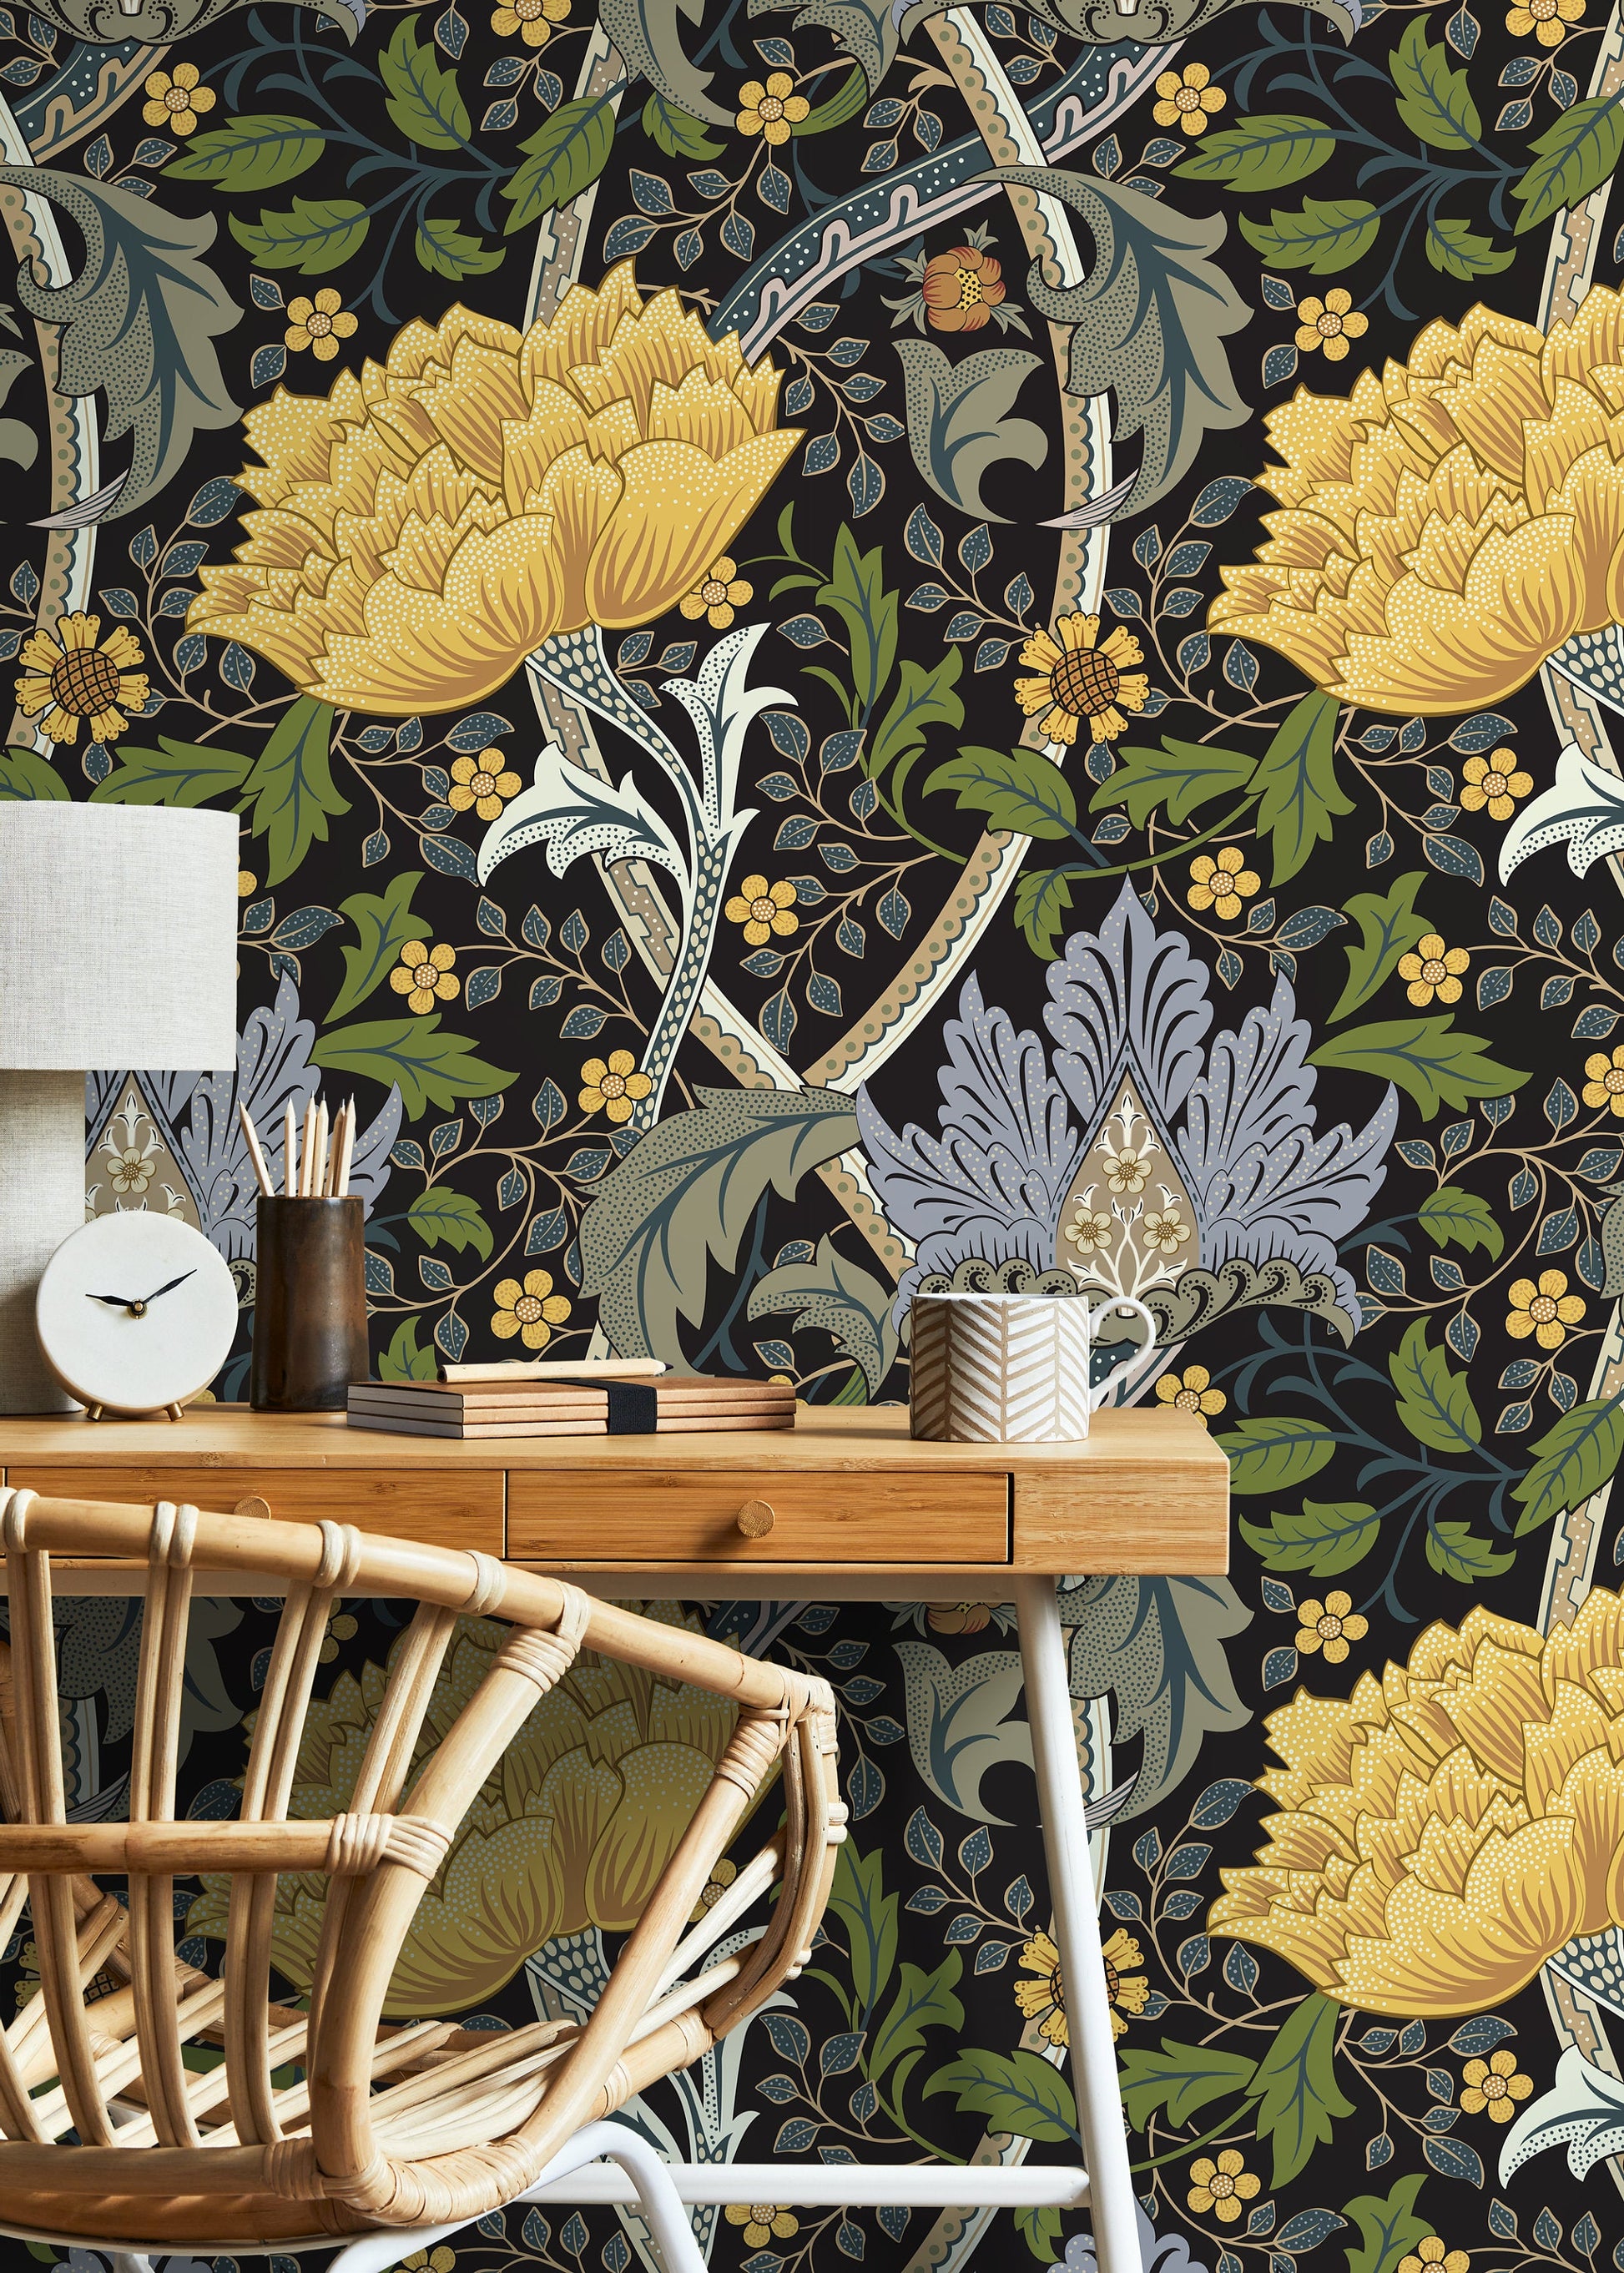 Large Floral William Morris Wallpaper / Peel and Stick Wallpaper Removable Wallpaper Home Decor Wall Art Wall Decor Room Decor - C997